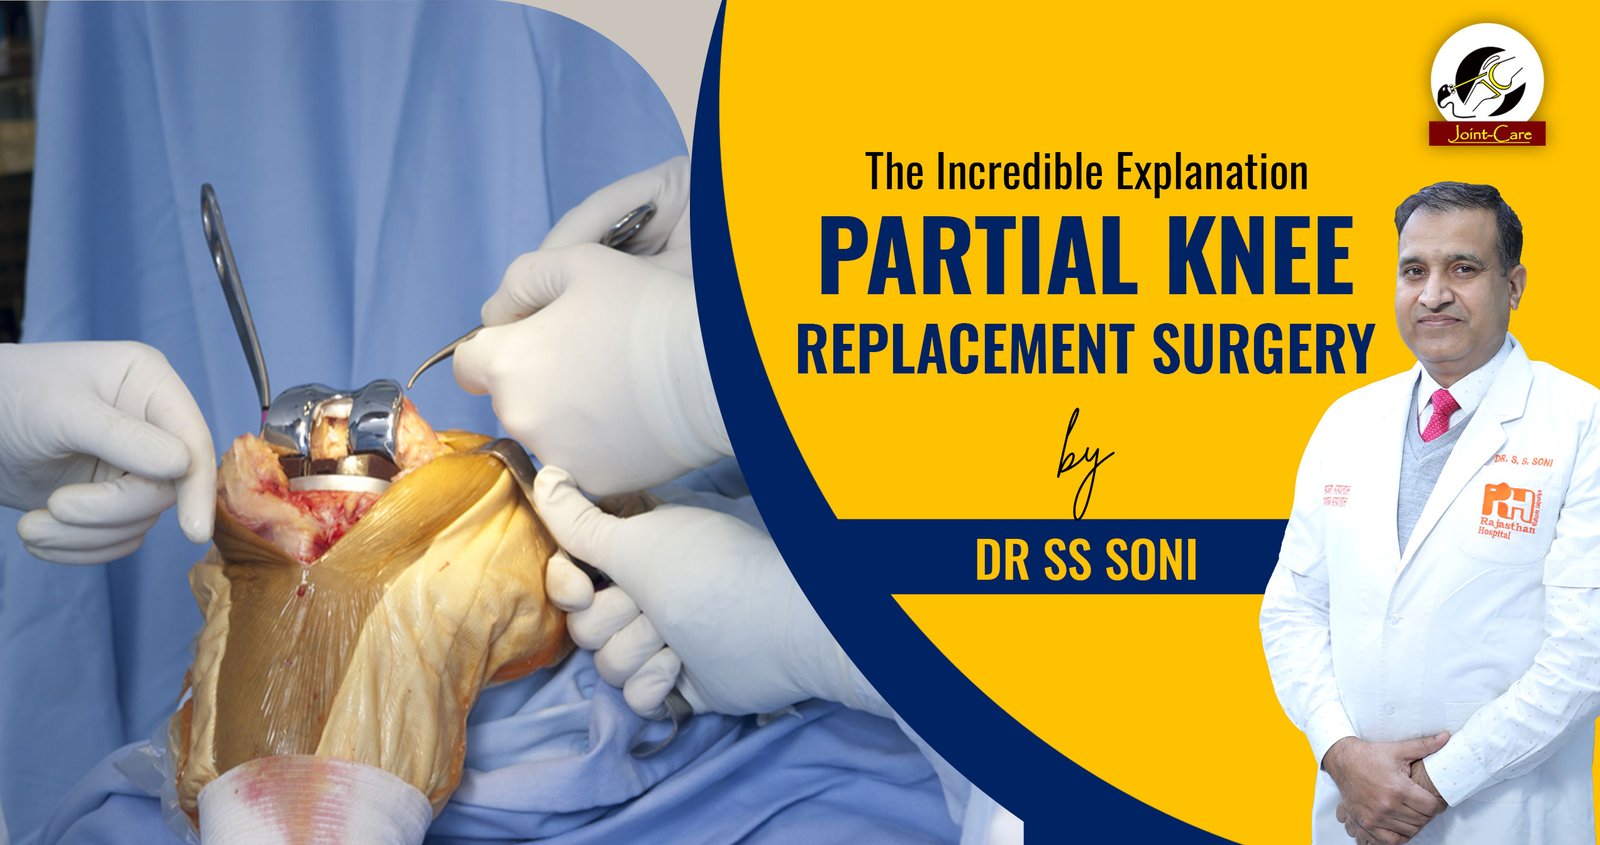 All about partial knee replacement surgery